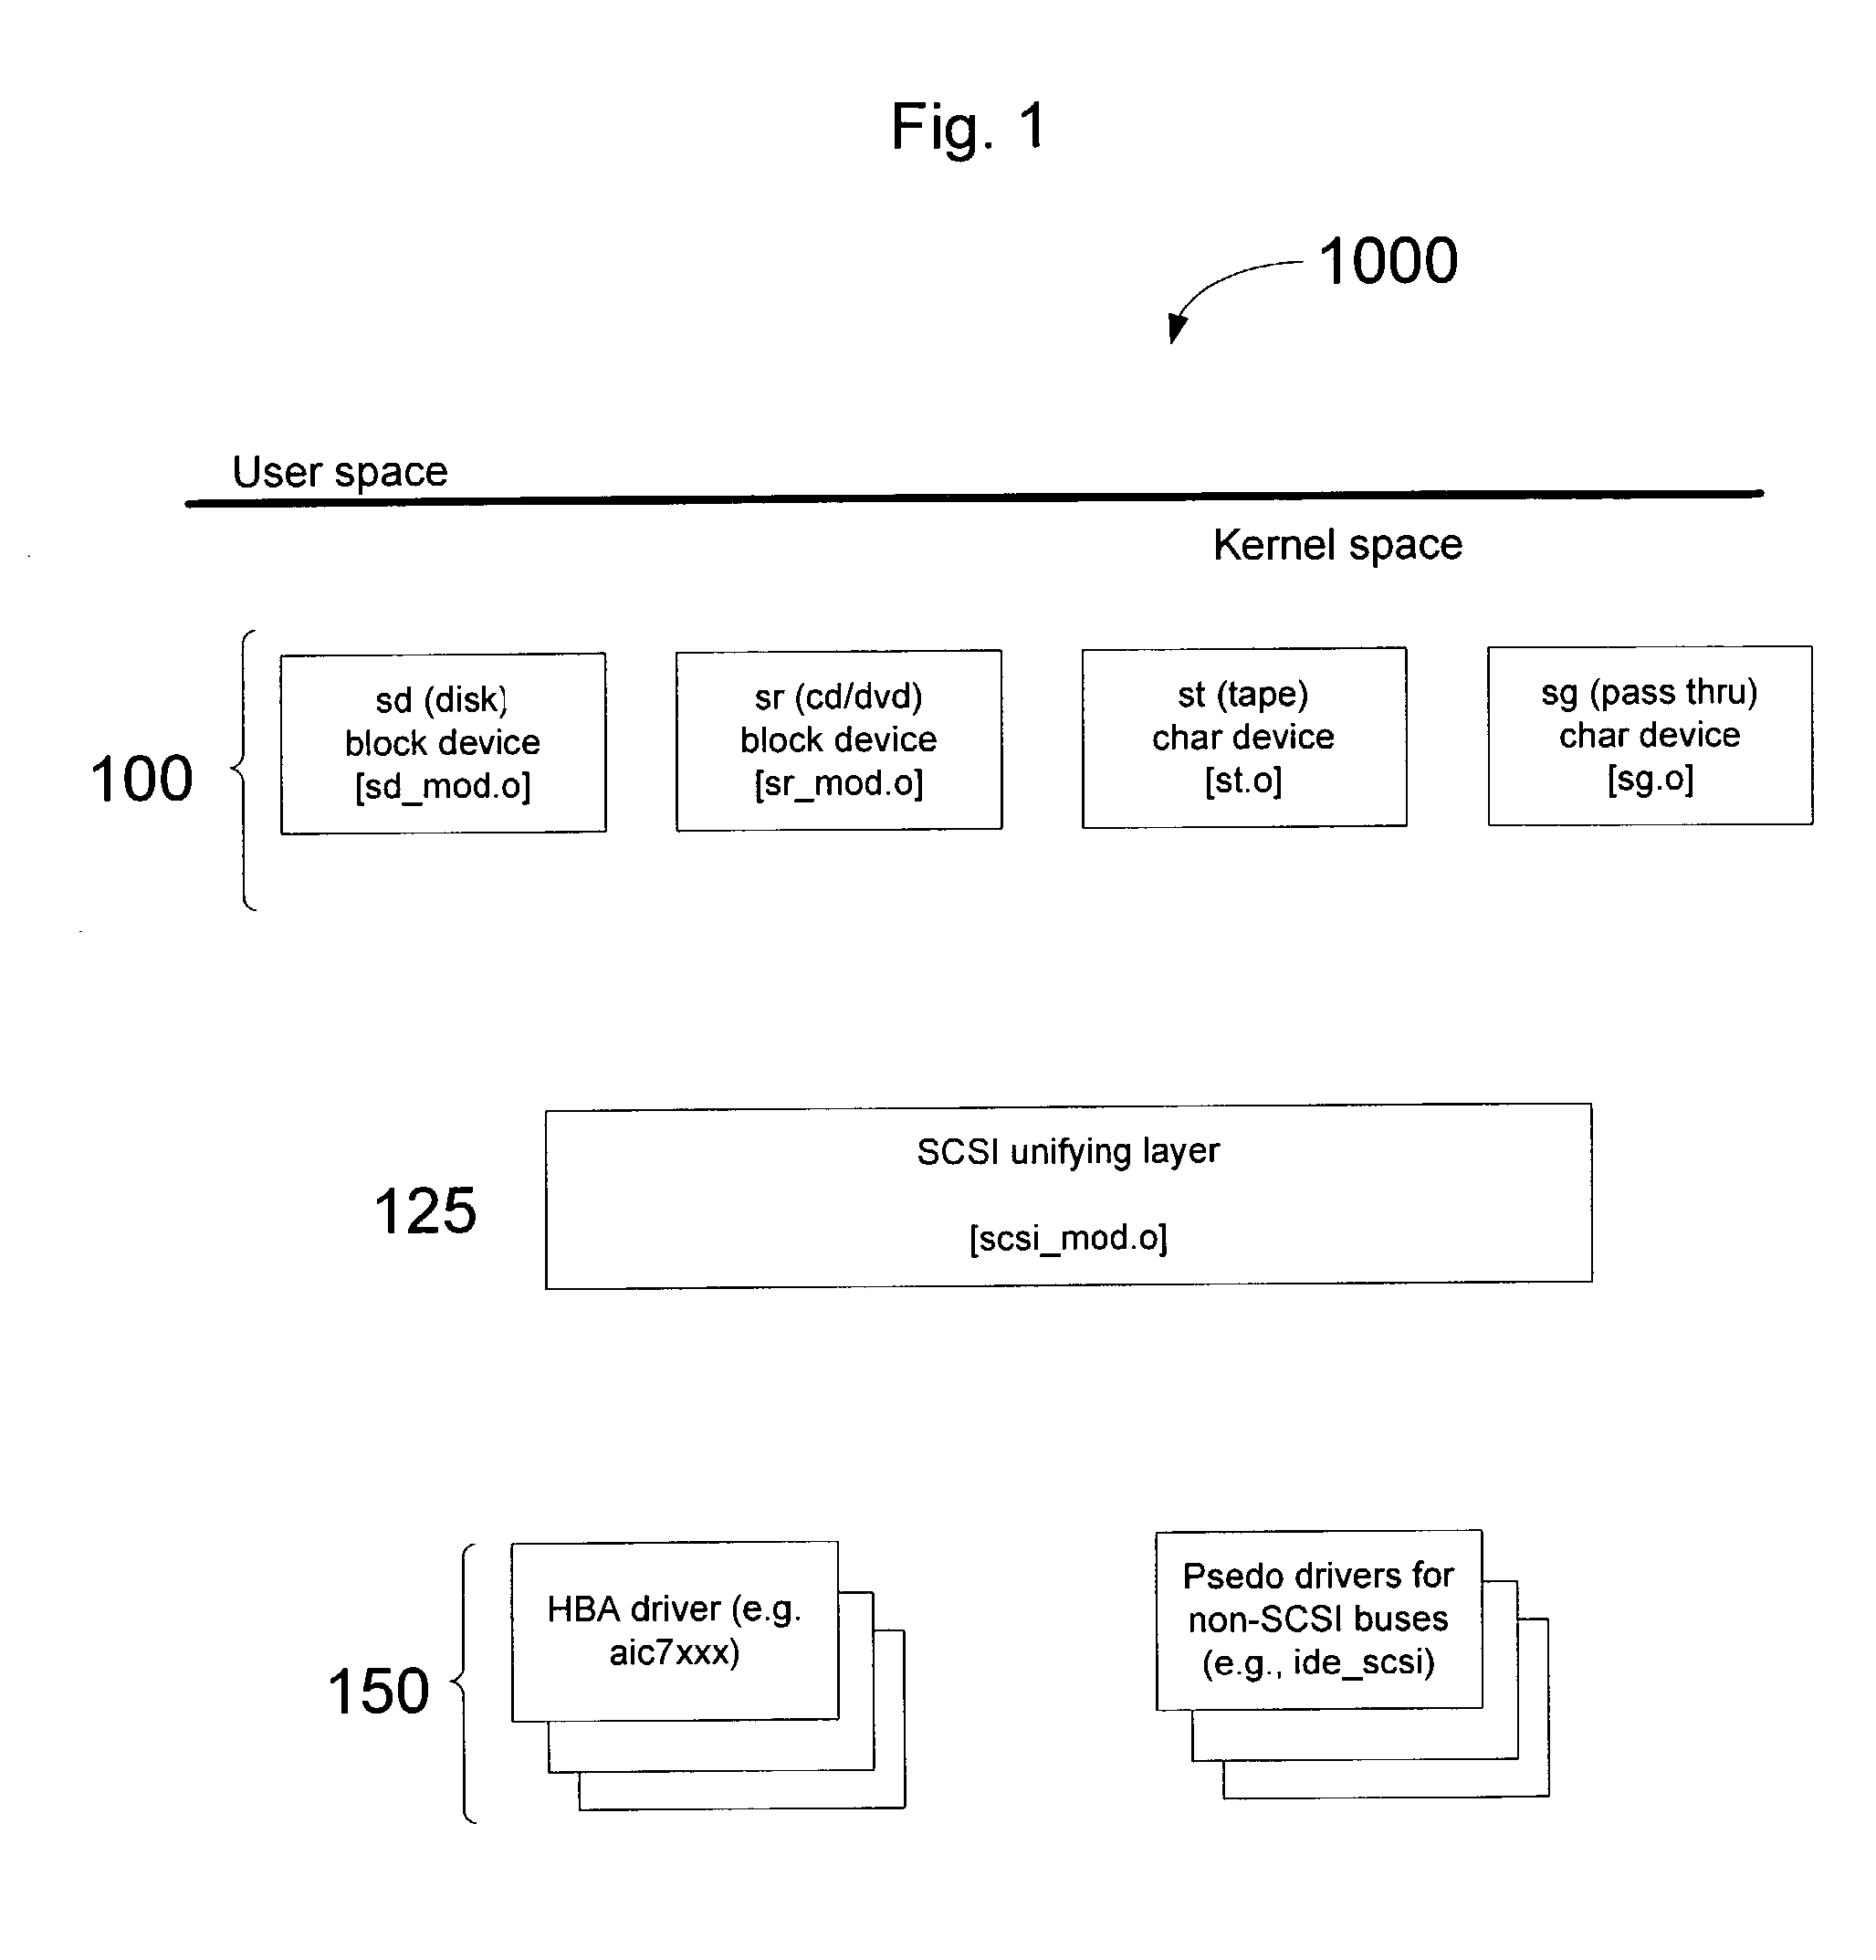 Method and apparatus for identifying multiple paths to a SCSI device using a calculated unique identifier